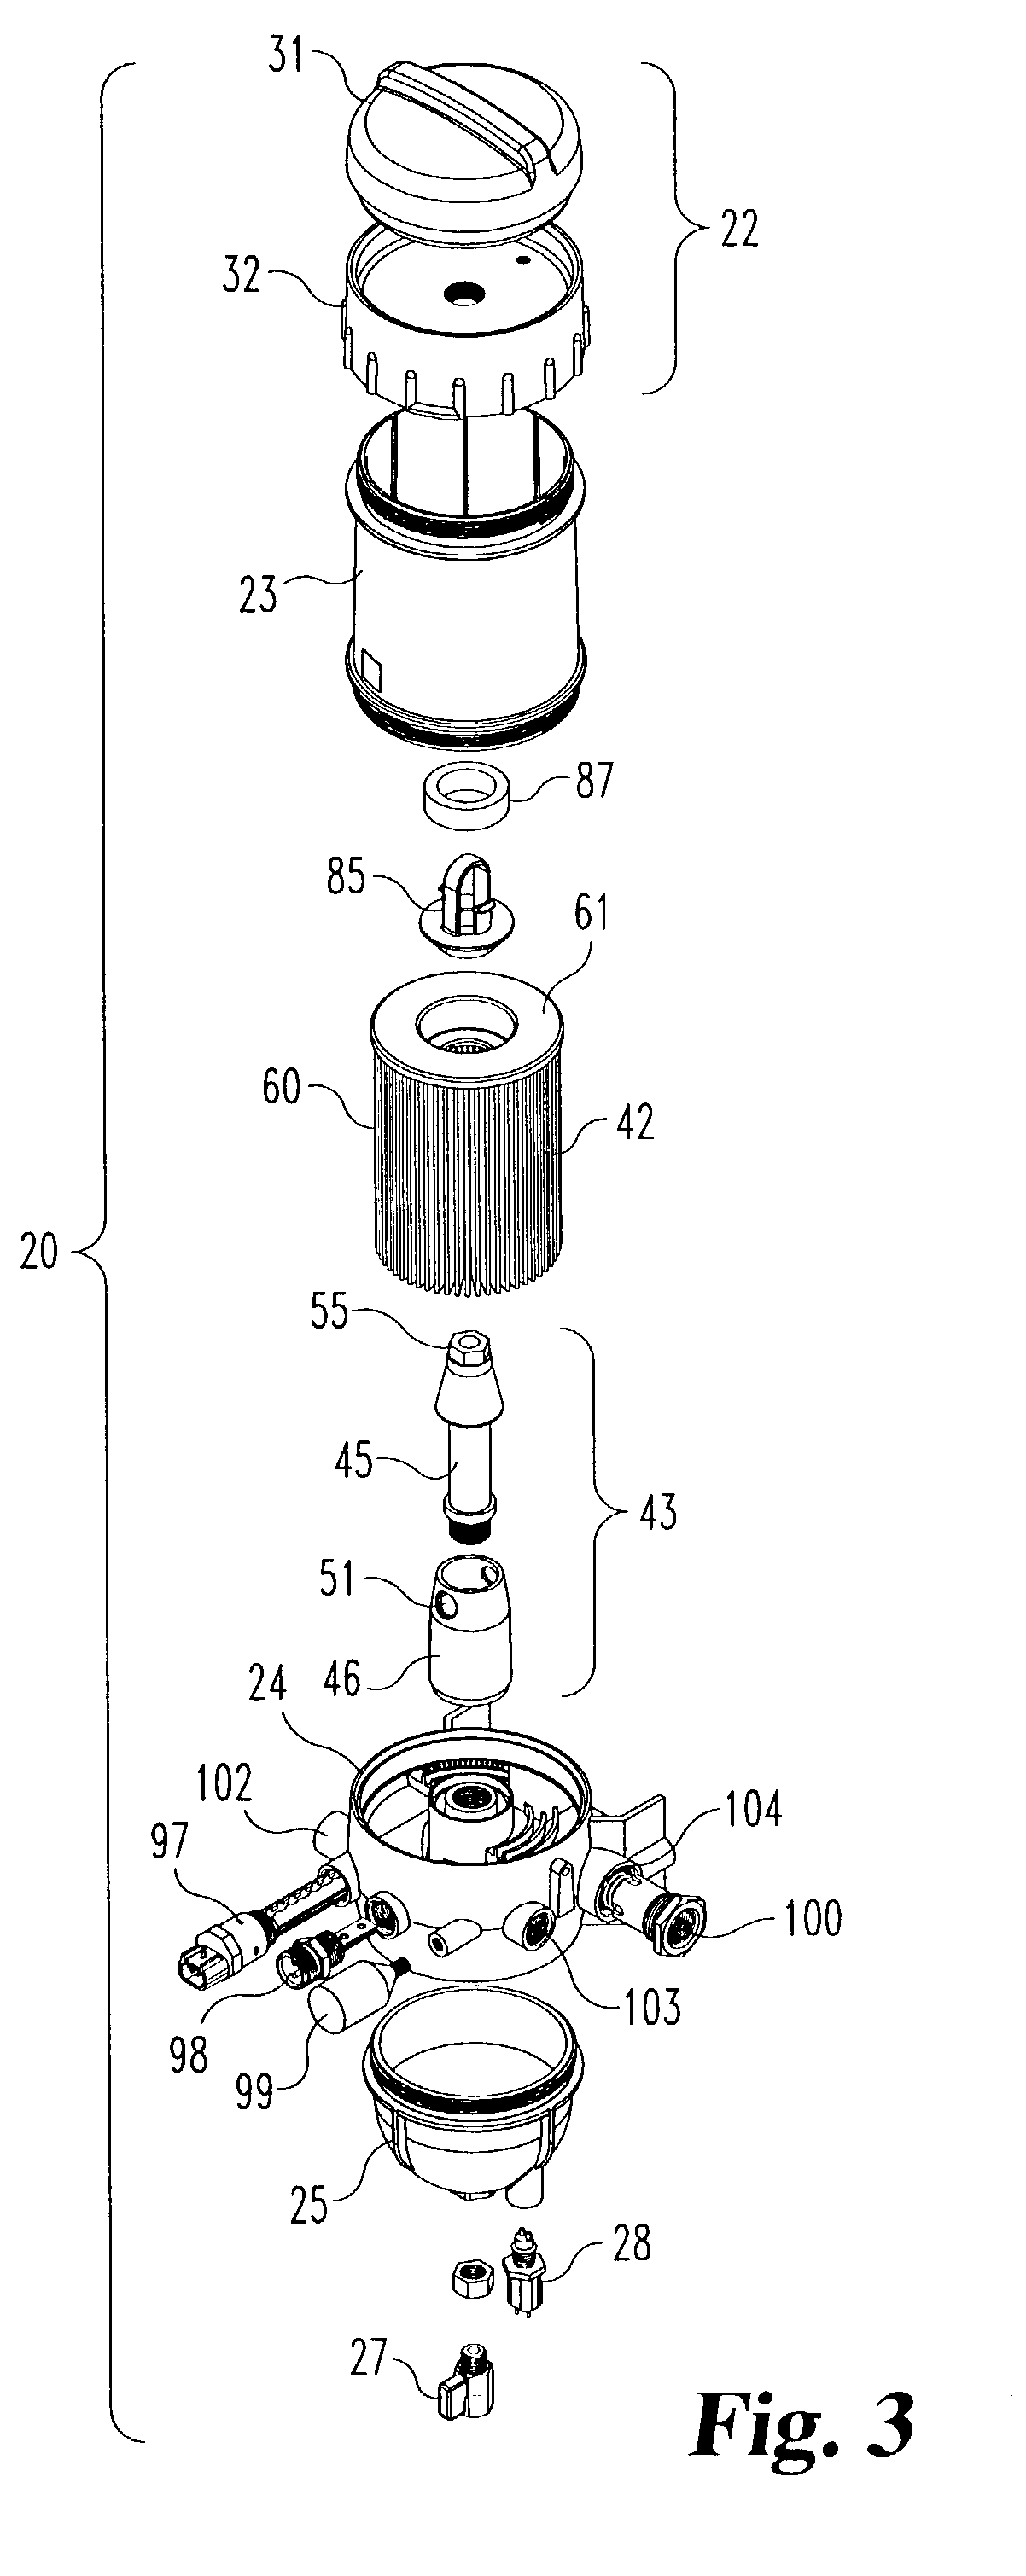 Fuel-water separator unit with parallel flow